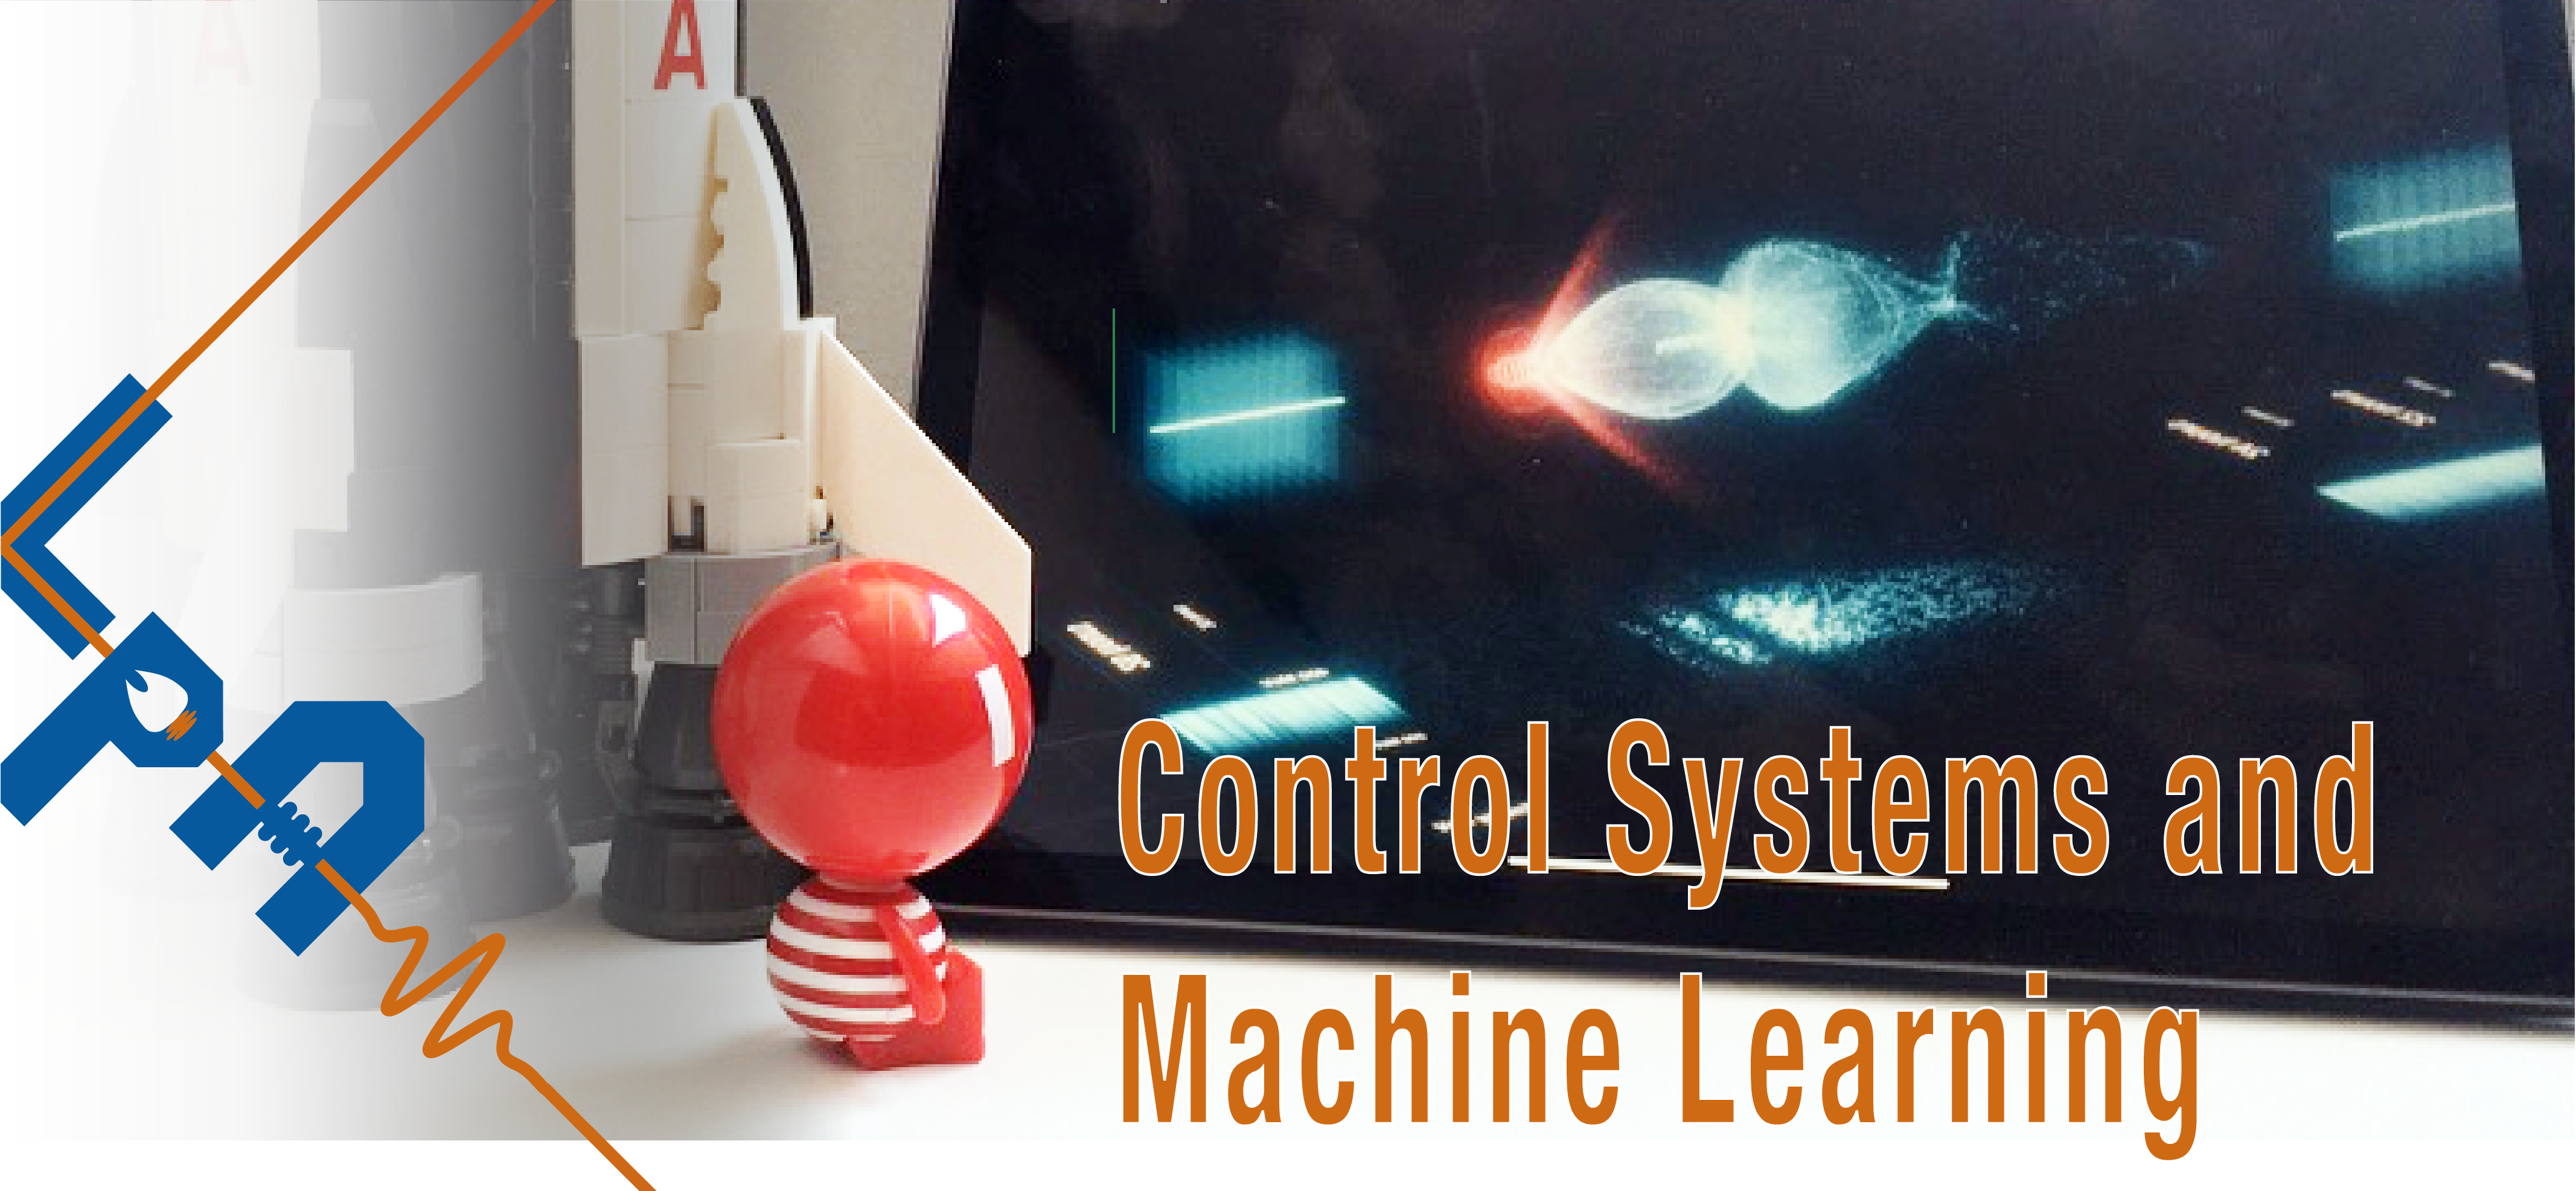 LPA Online Workshop on Control Systems and Machine Learning